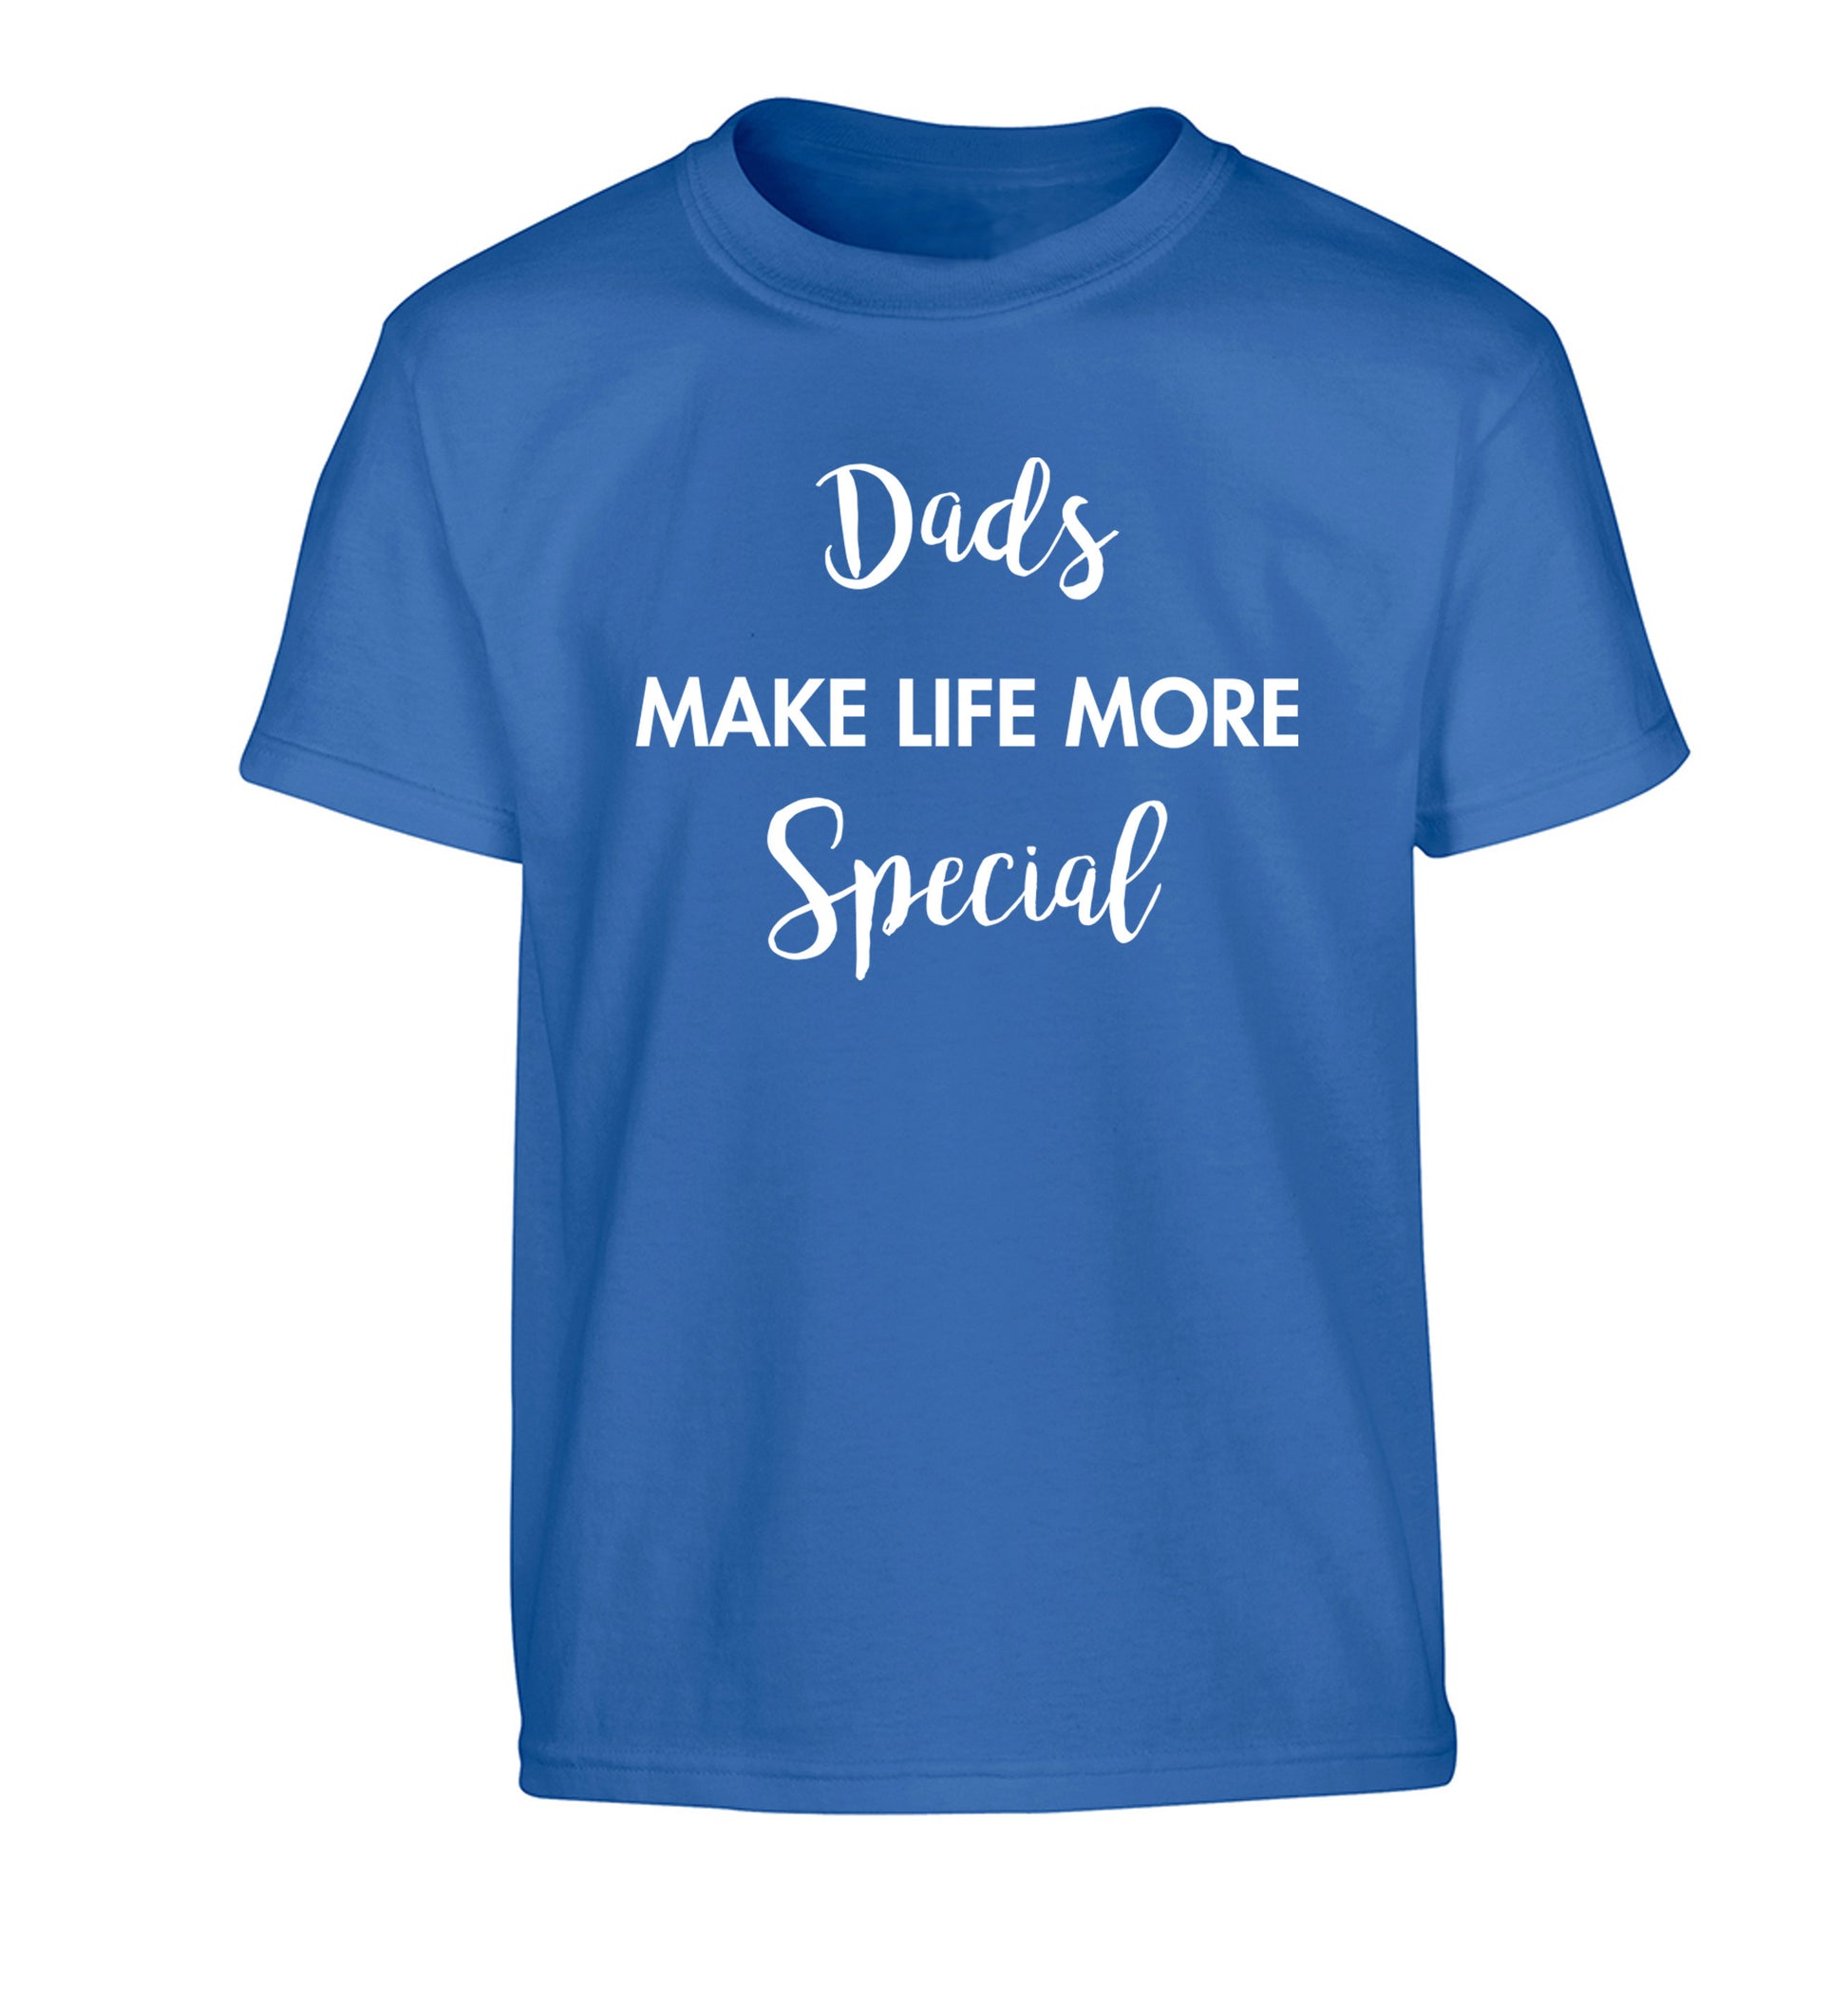 Dads make life more special Children's blue Tshirt 12-14 Years